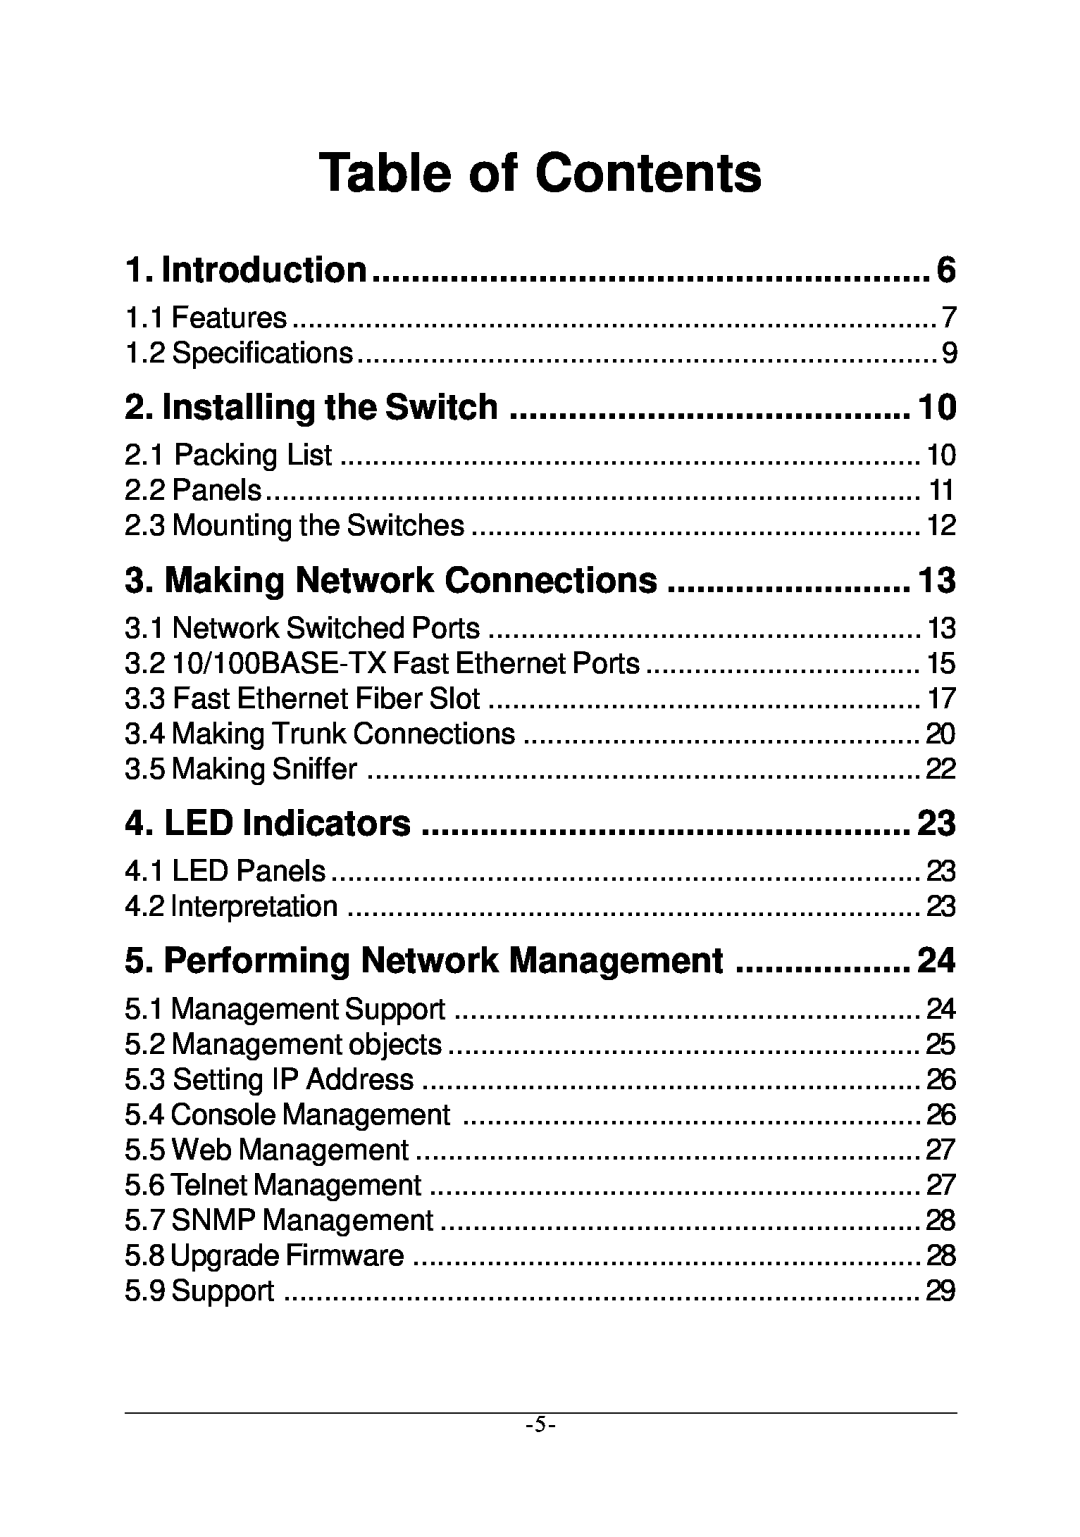 KTI Networks KS-801 Introduction, Installing the Switch, Making Network Connections, LED Indicators, Table of Contents 